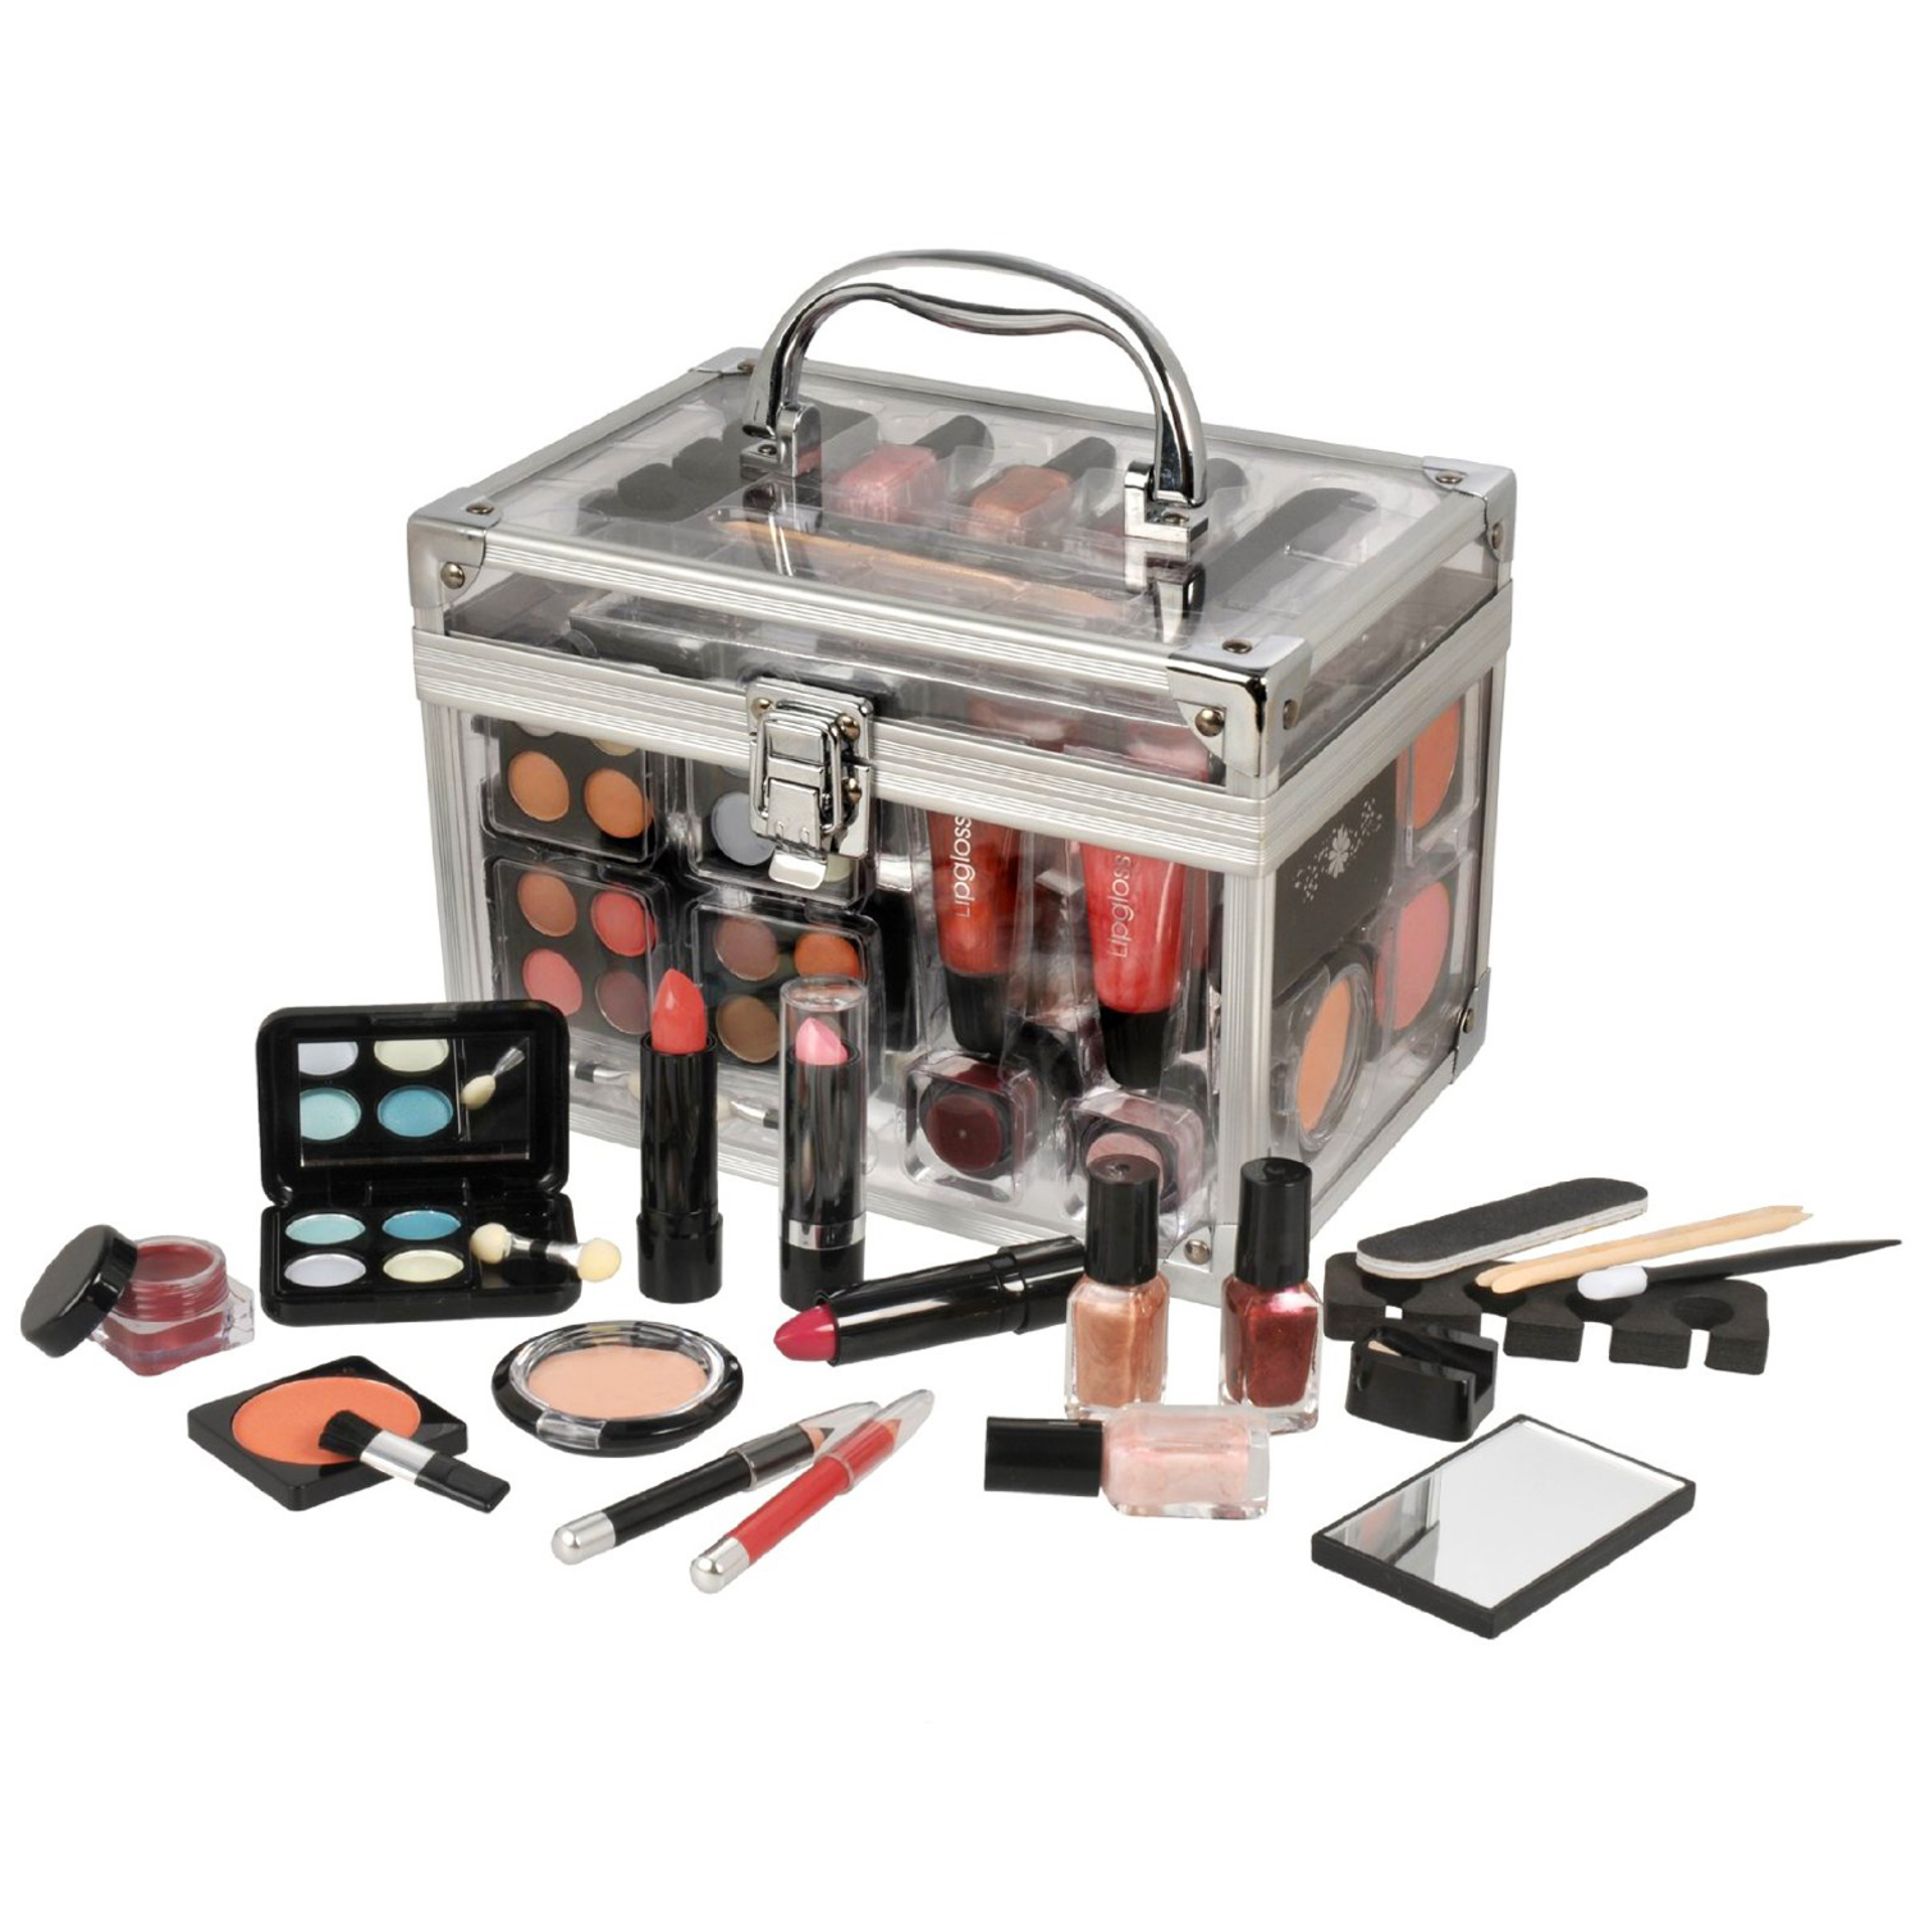 V *TRADE QTY* Brand New Ladies 42 Piece Cosmetic Set In Aluminium/Clear Travel Case RRP £29.95 X